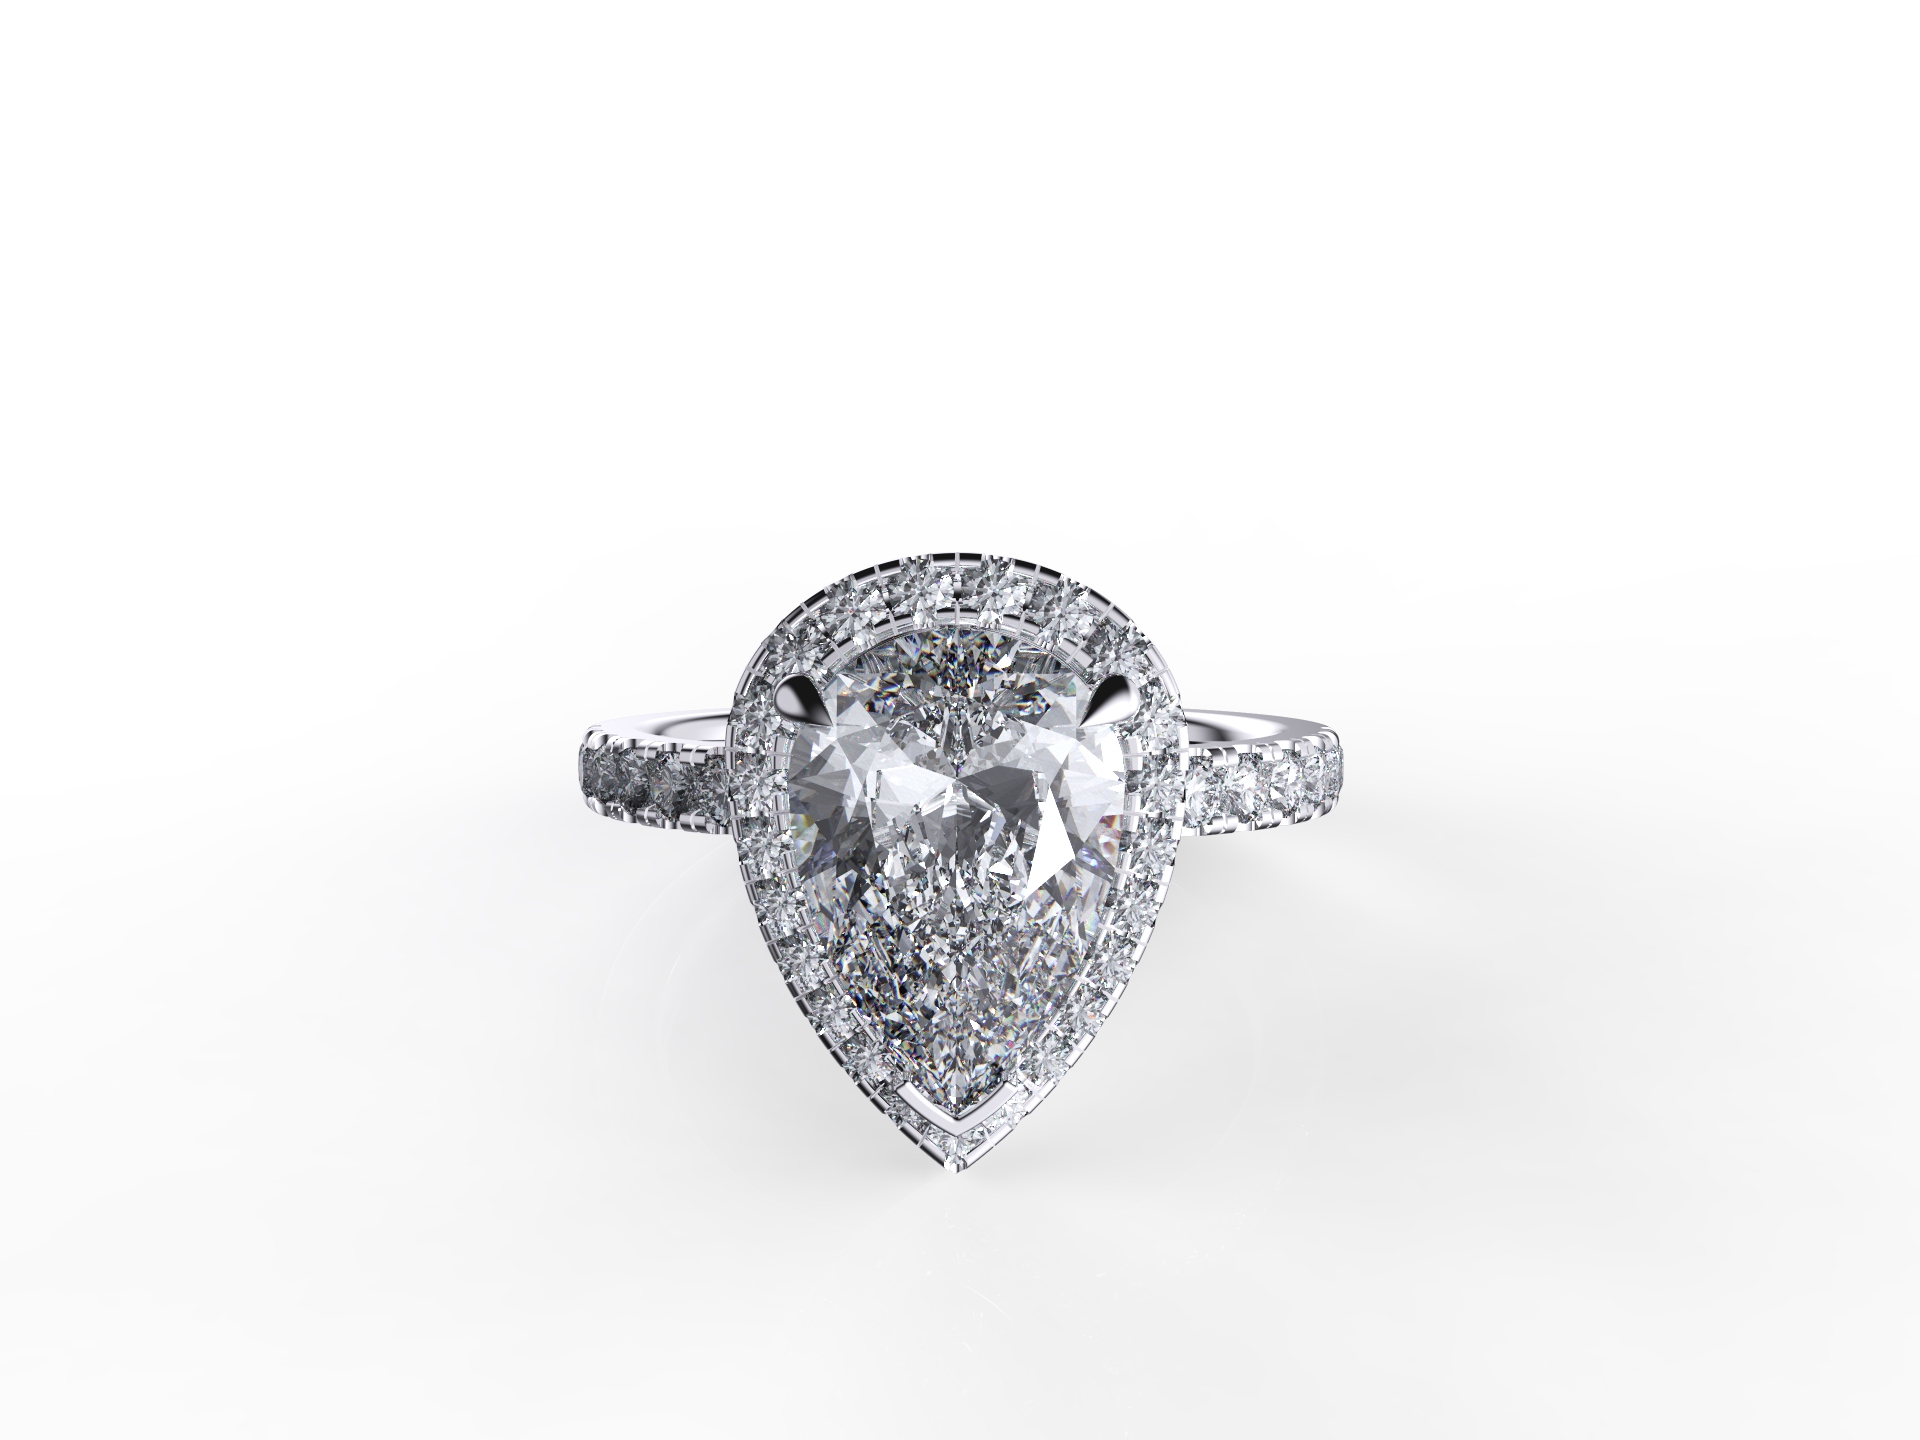 Top Down View of Pear Diamond Halo Ring